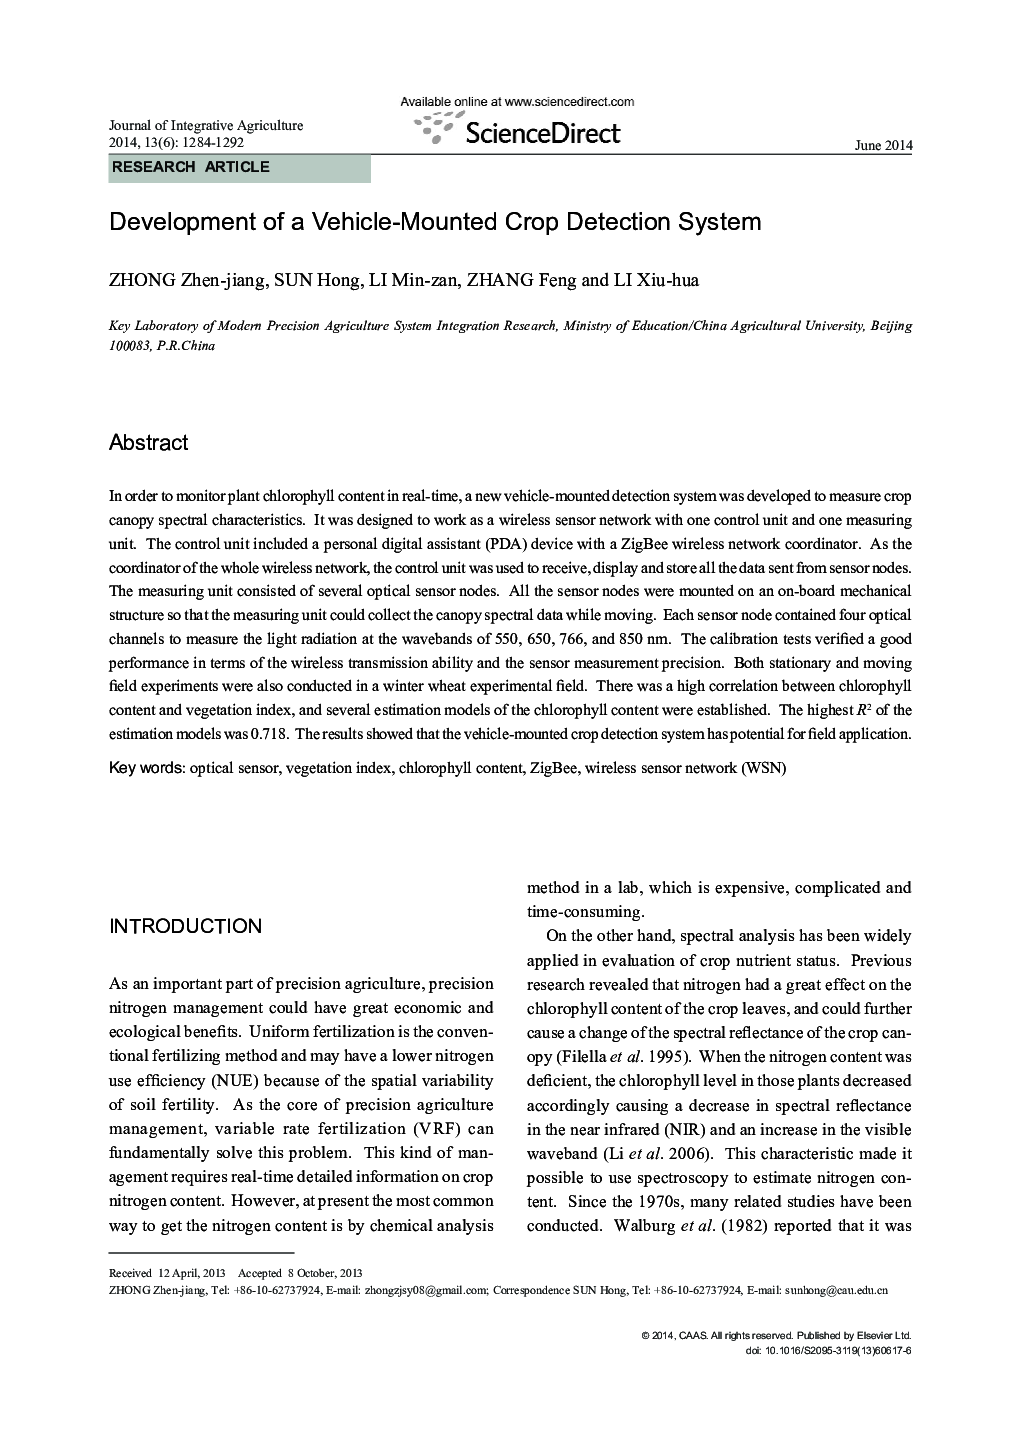 Development of a Vehicle-Mounted Crop Detection System